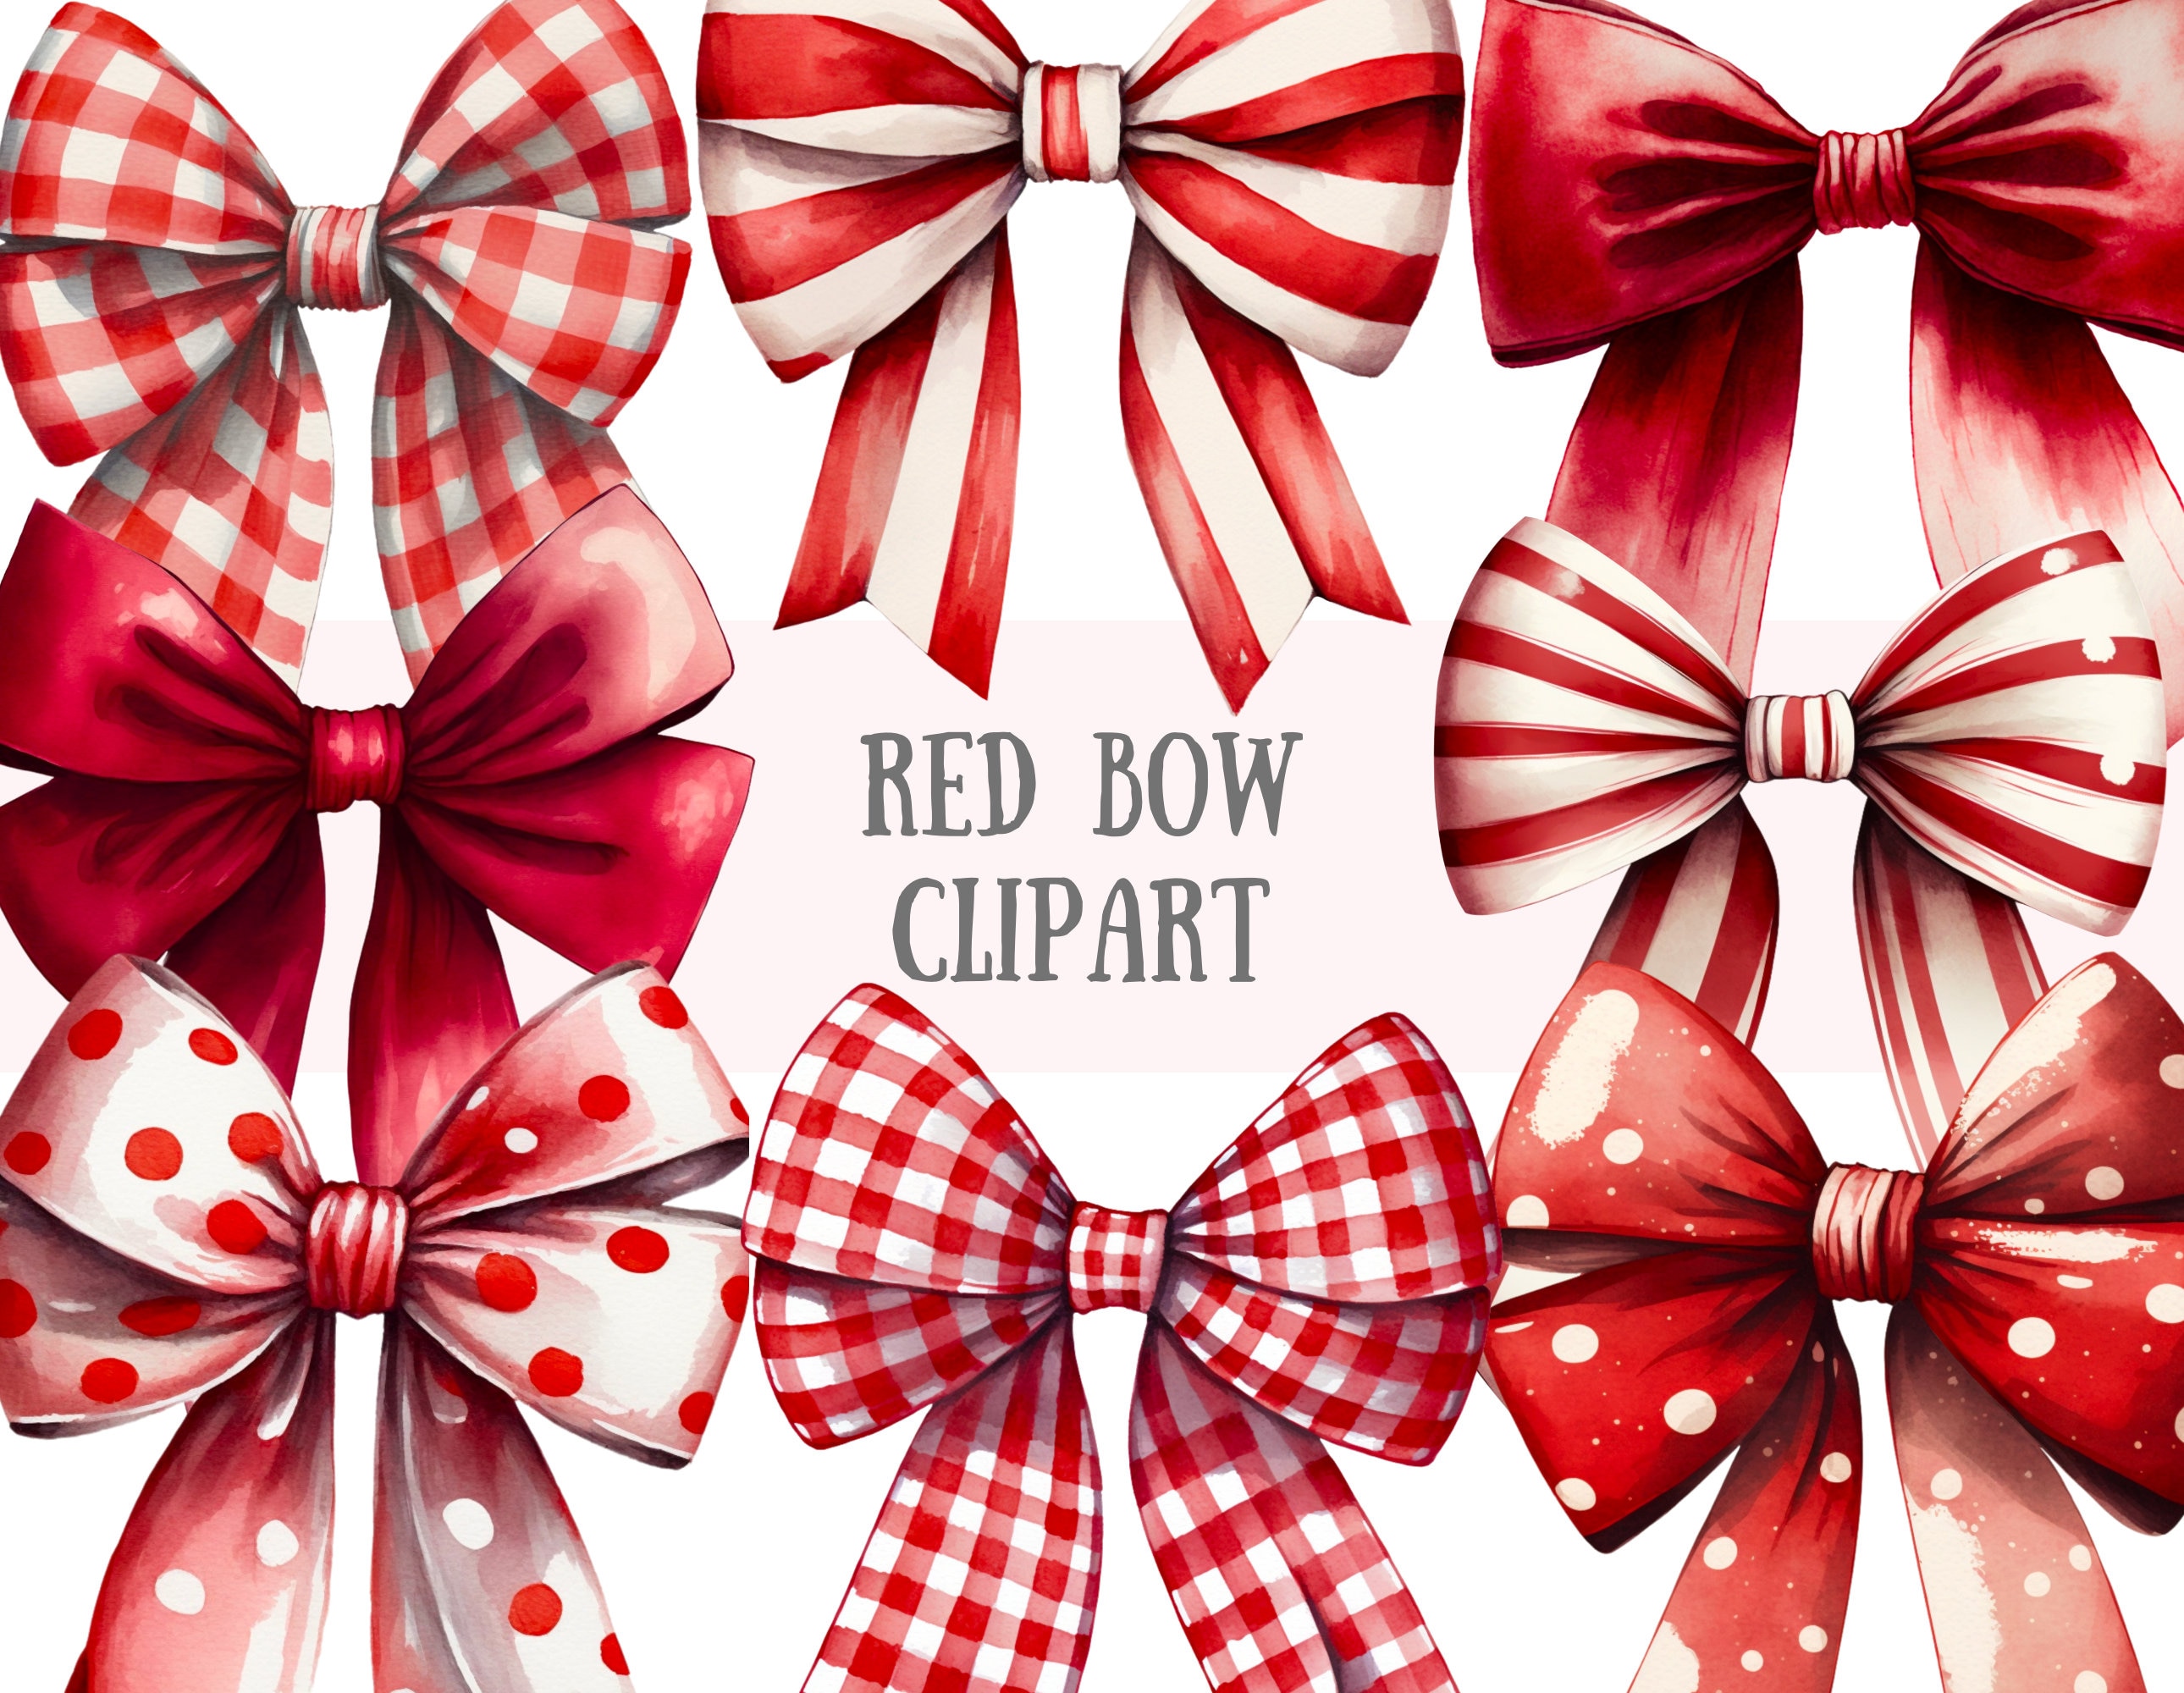 Watercolour Red Bows Clipart Red Velvet Satin Bow PNG Digital Image  Downloads for Card Making, Scrapbook, Junk Journal, Paper Crafts 